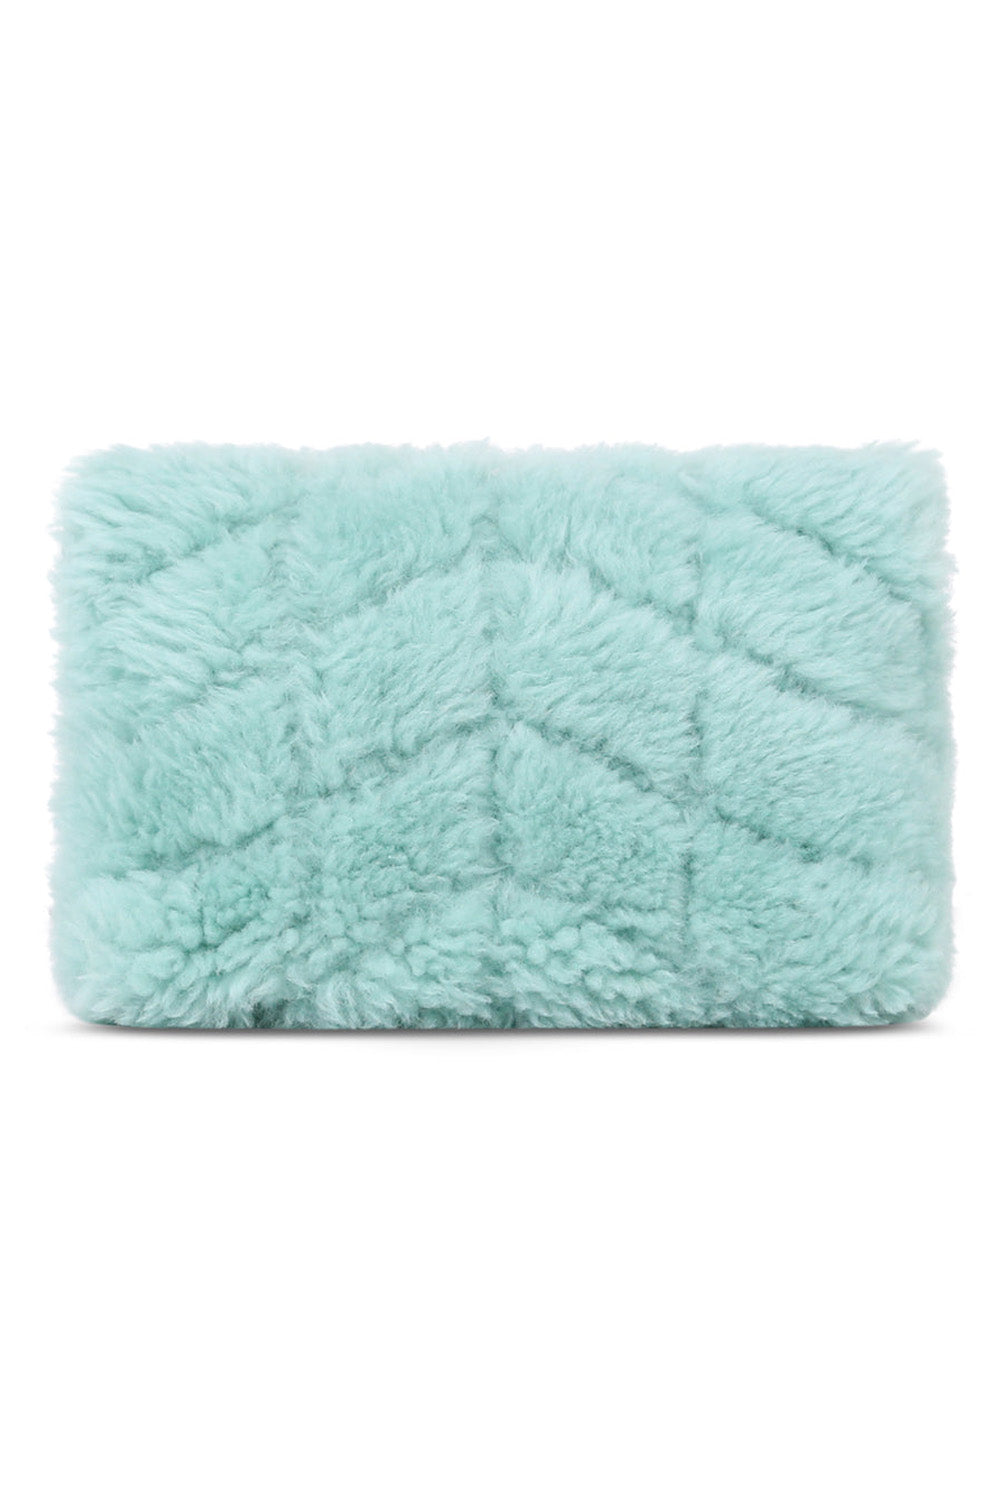 SAINT LAURENT BAGS GREEN LOULOU SHEARLING PUFFER POUCH | ICED MINT